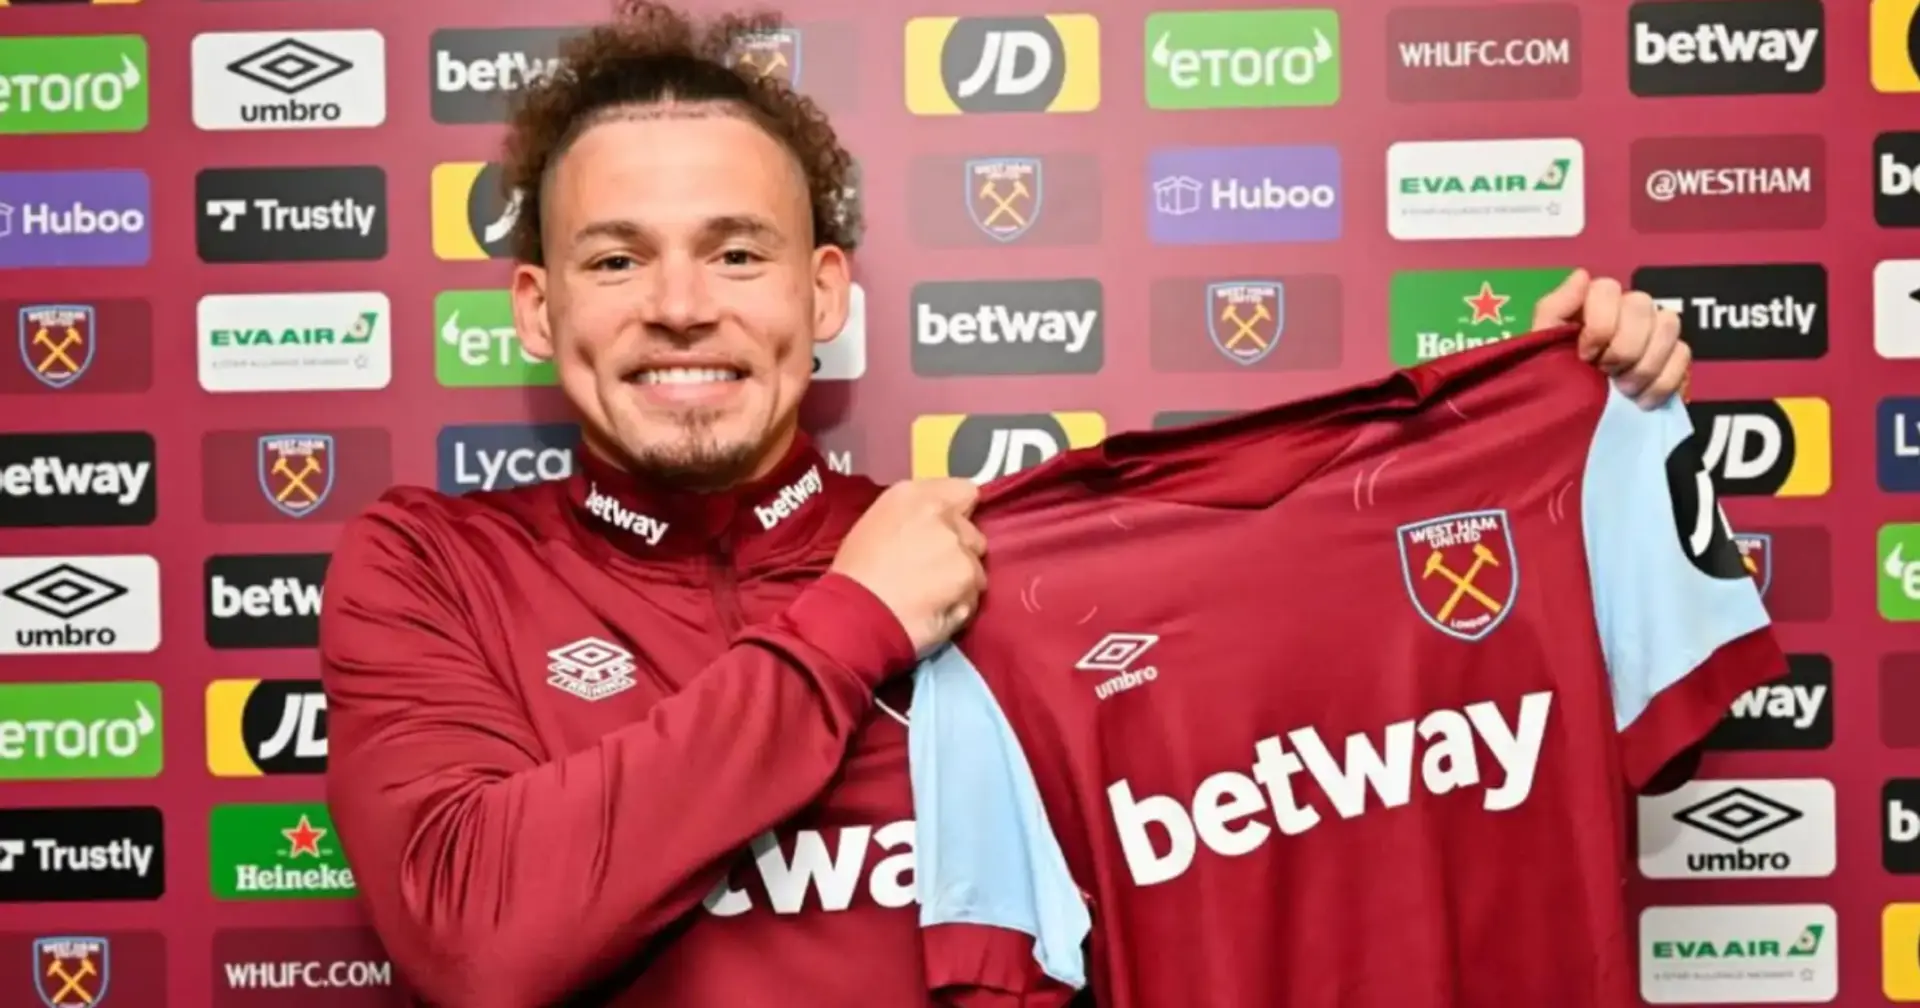 Kalvin Phillips is given unusual West Ham shirt number 